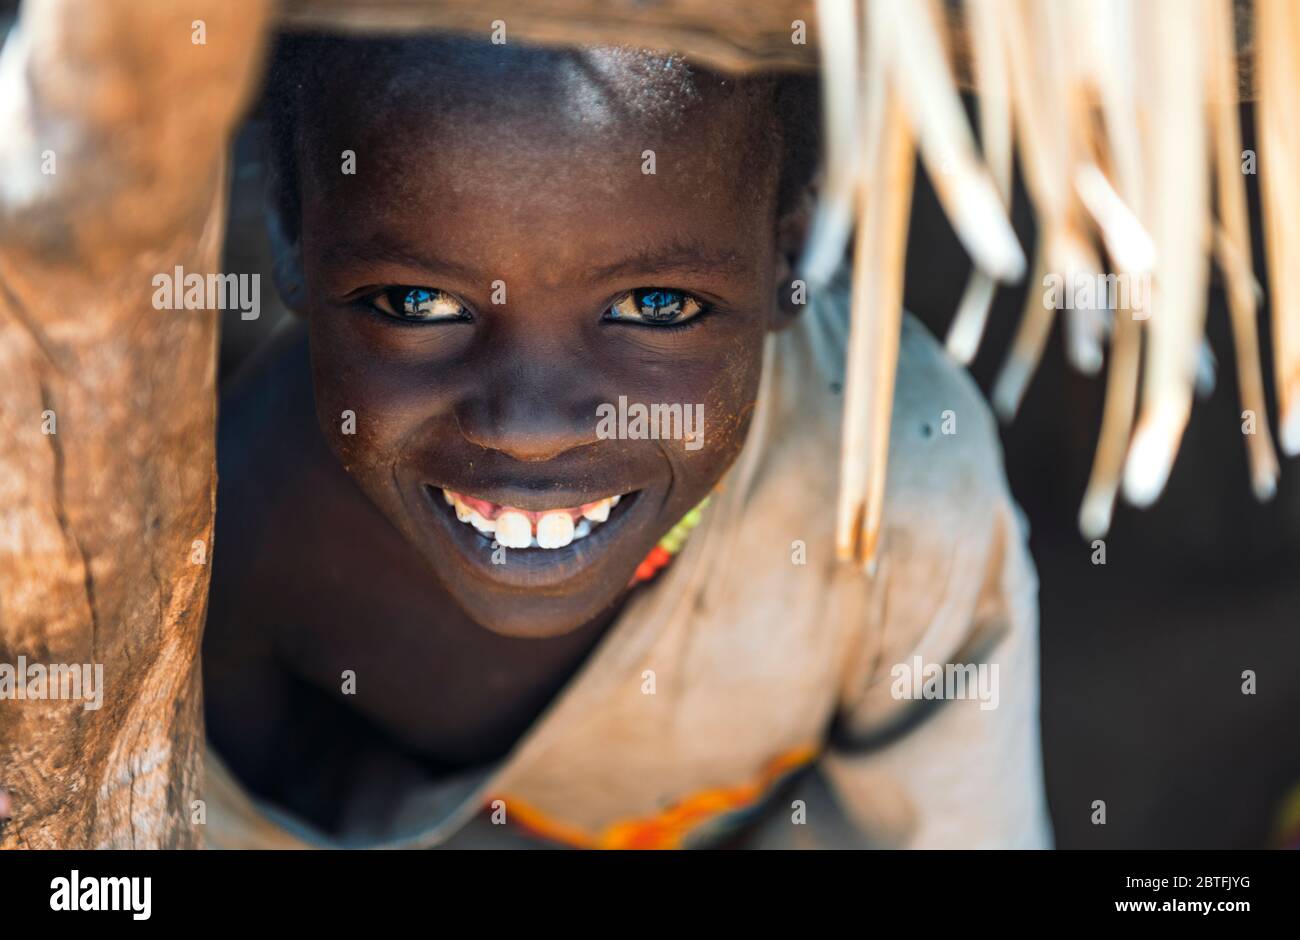 BOYA TRIBE, SOUTH SUDAN - MARCH 10, 2020: Boy optimist with beautiful brown eyes with reflection wearing rags looking out window hole and smiling at Stock Photo